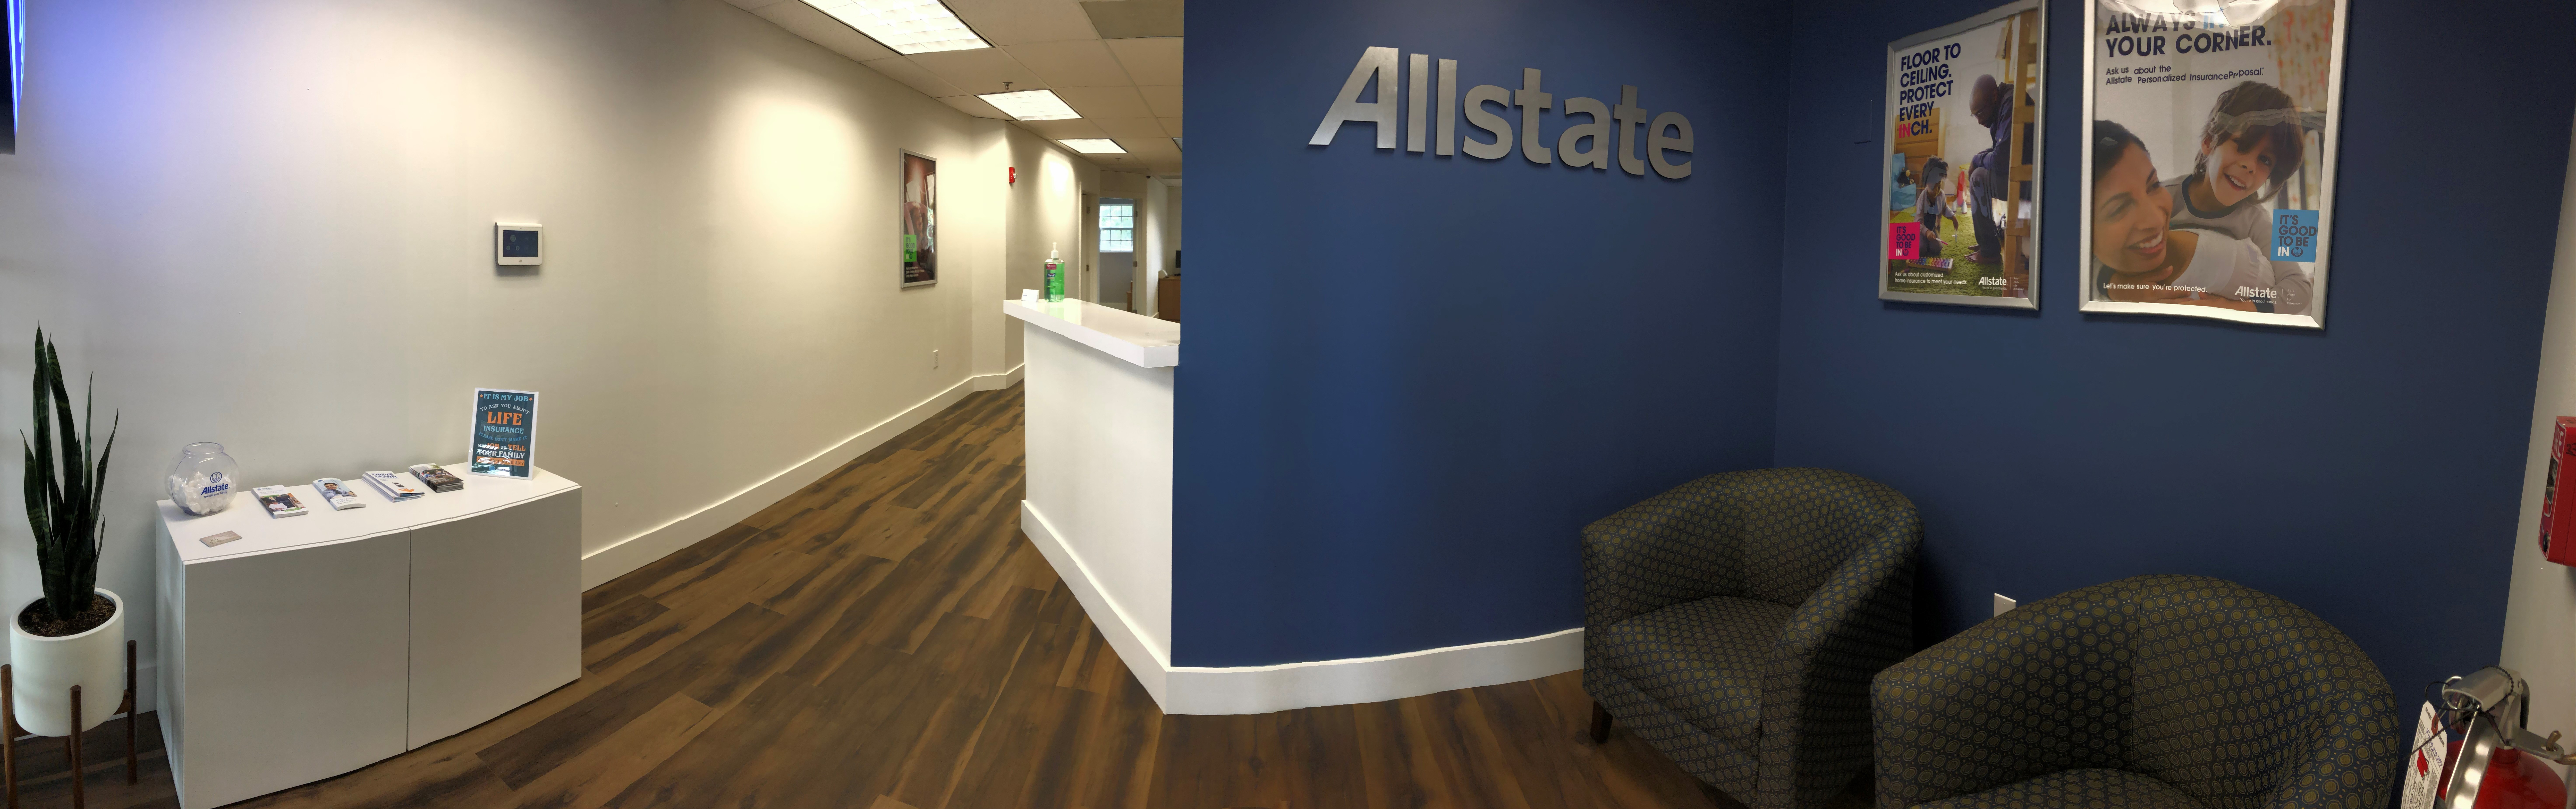 Shield Property & Casualty Insurance: Allstate Insurance